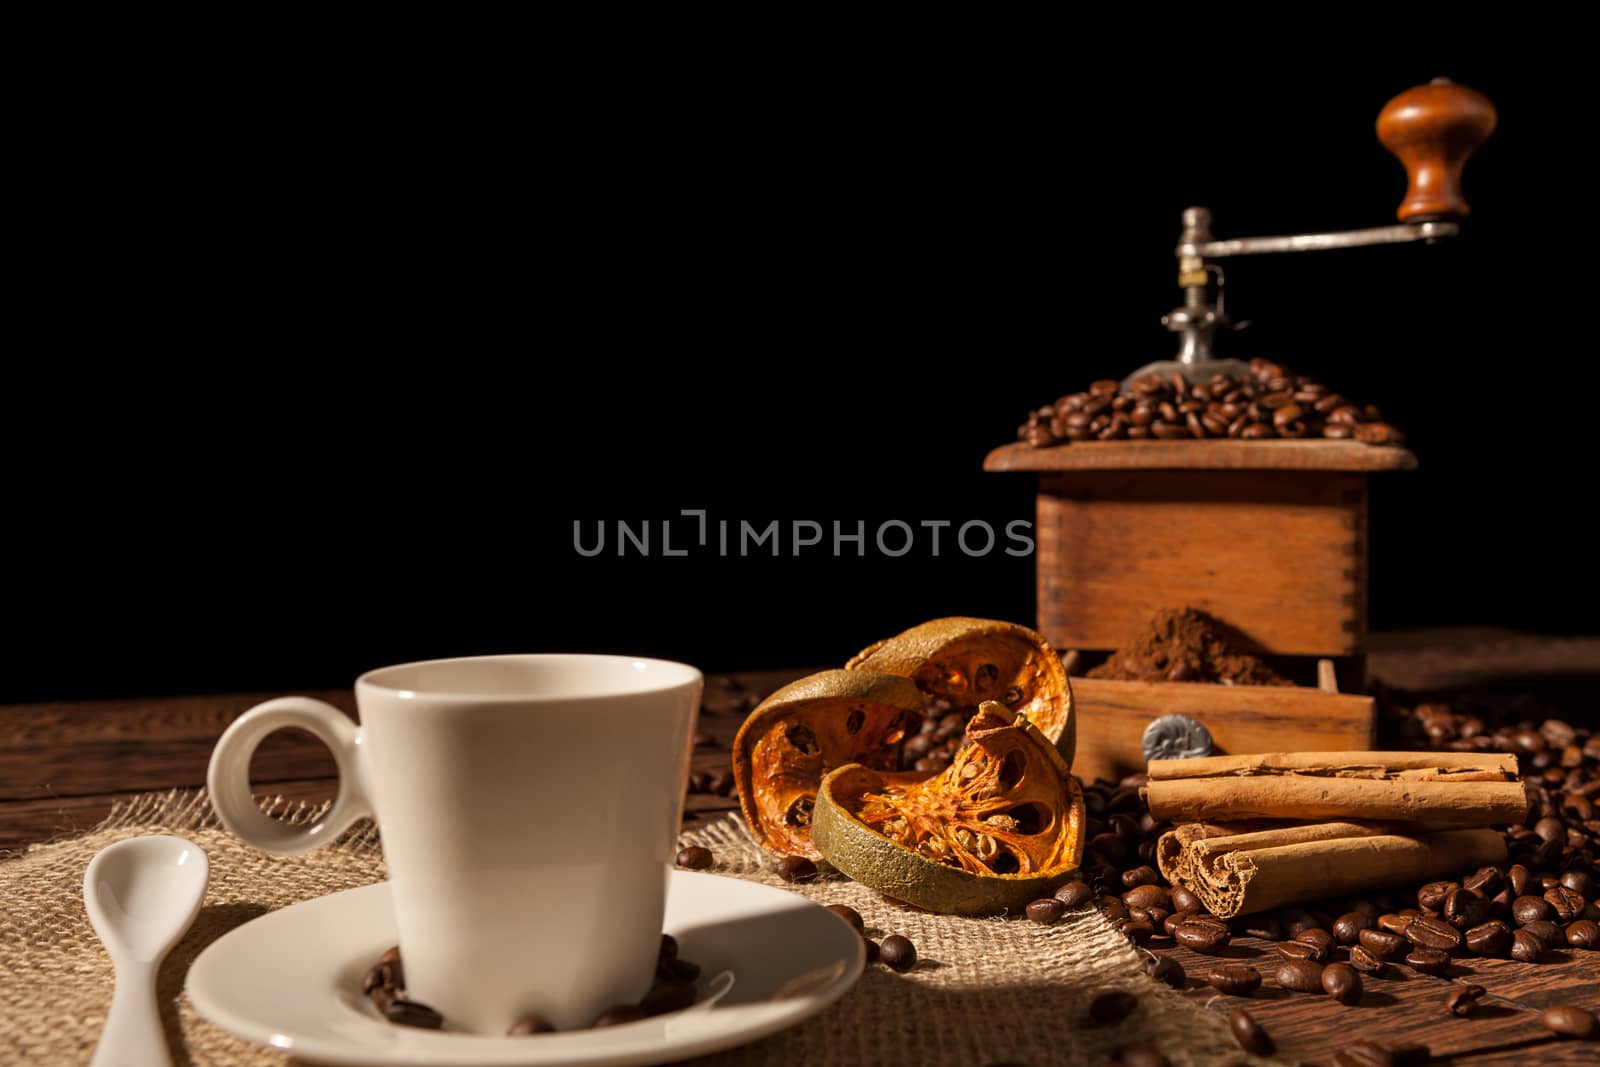 Coffee cup, dried orange fruit, cinnamon and coffee grinder on a black background